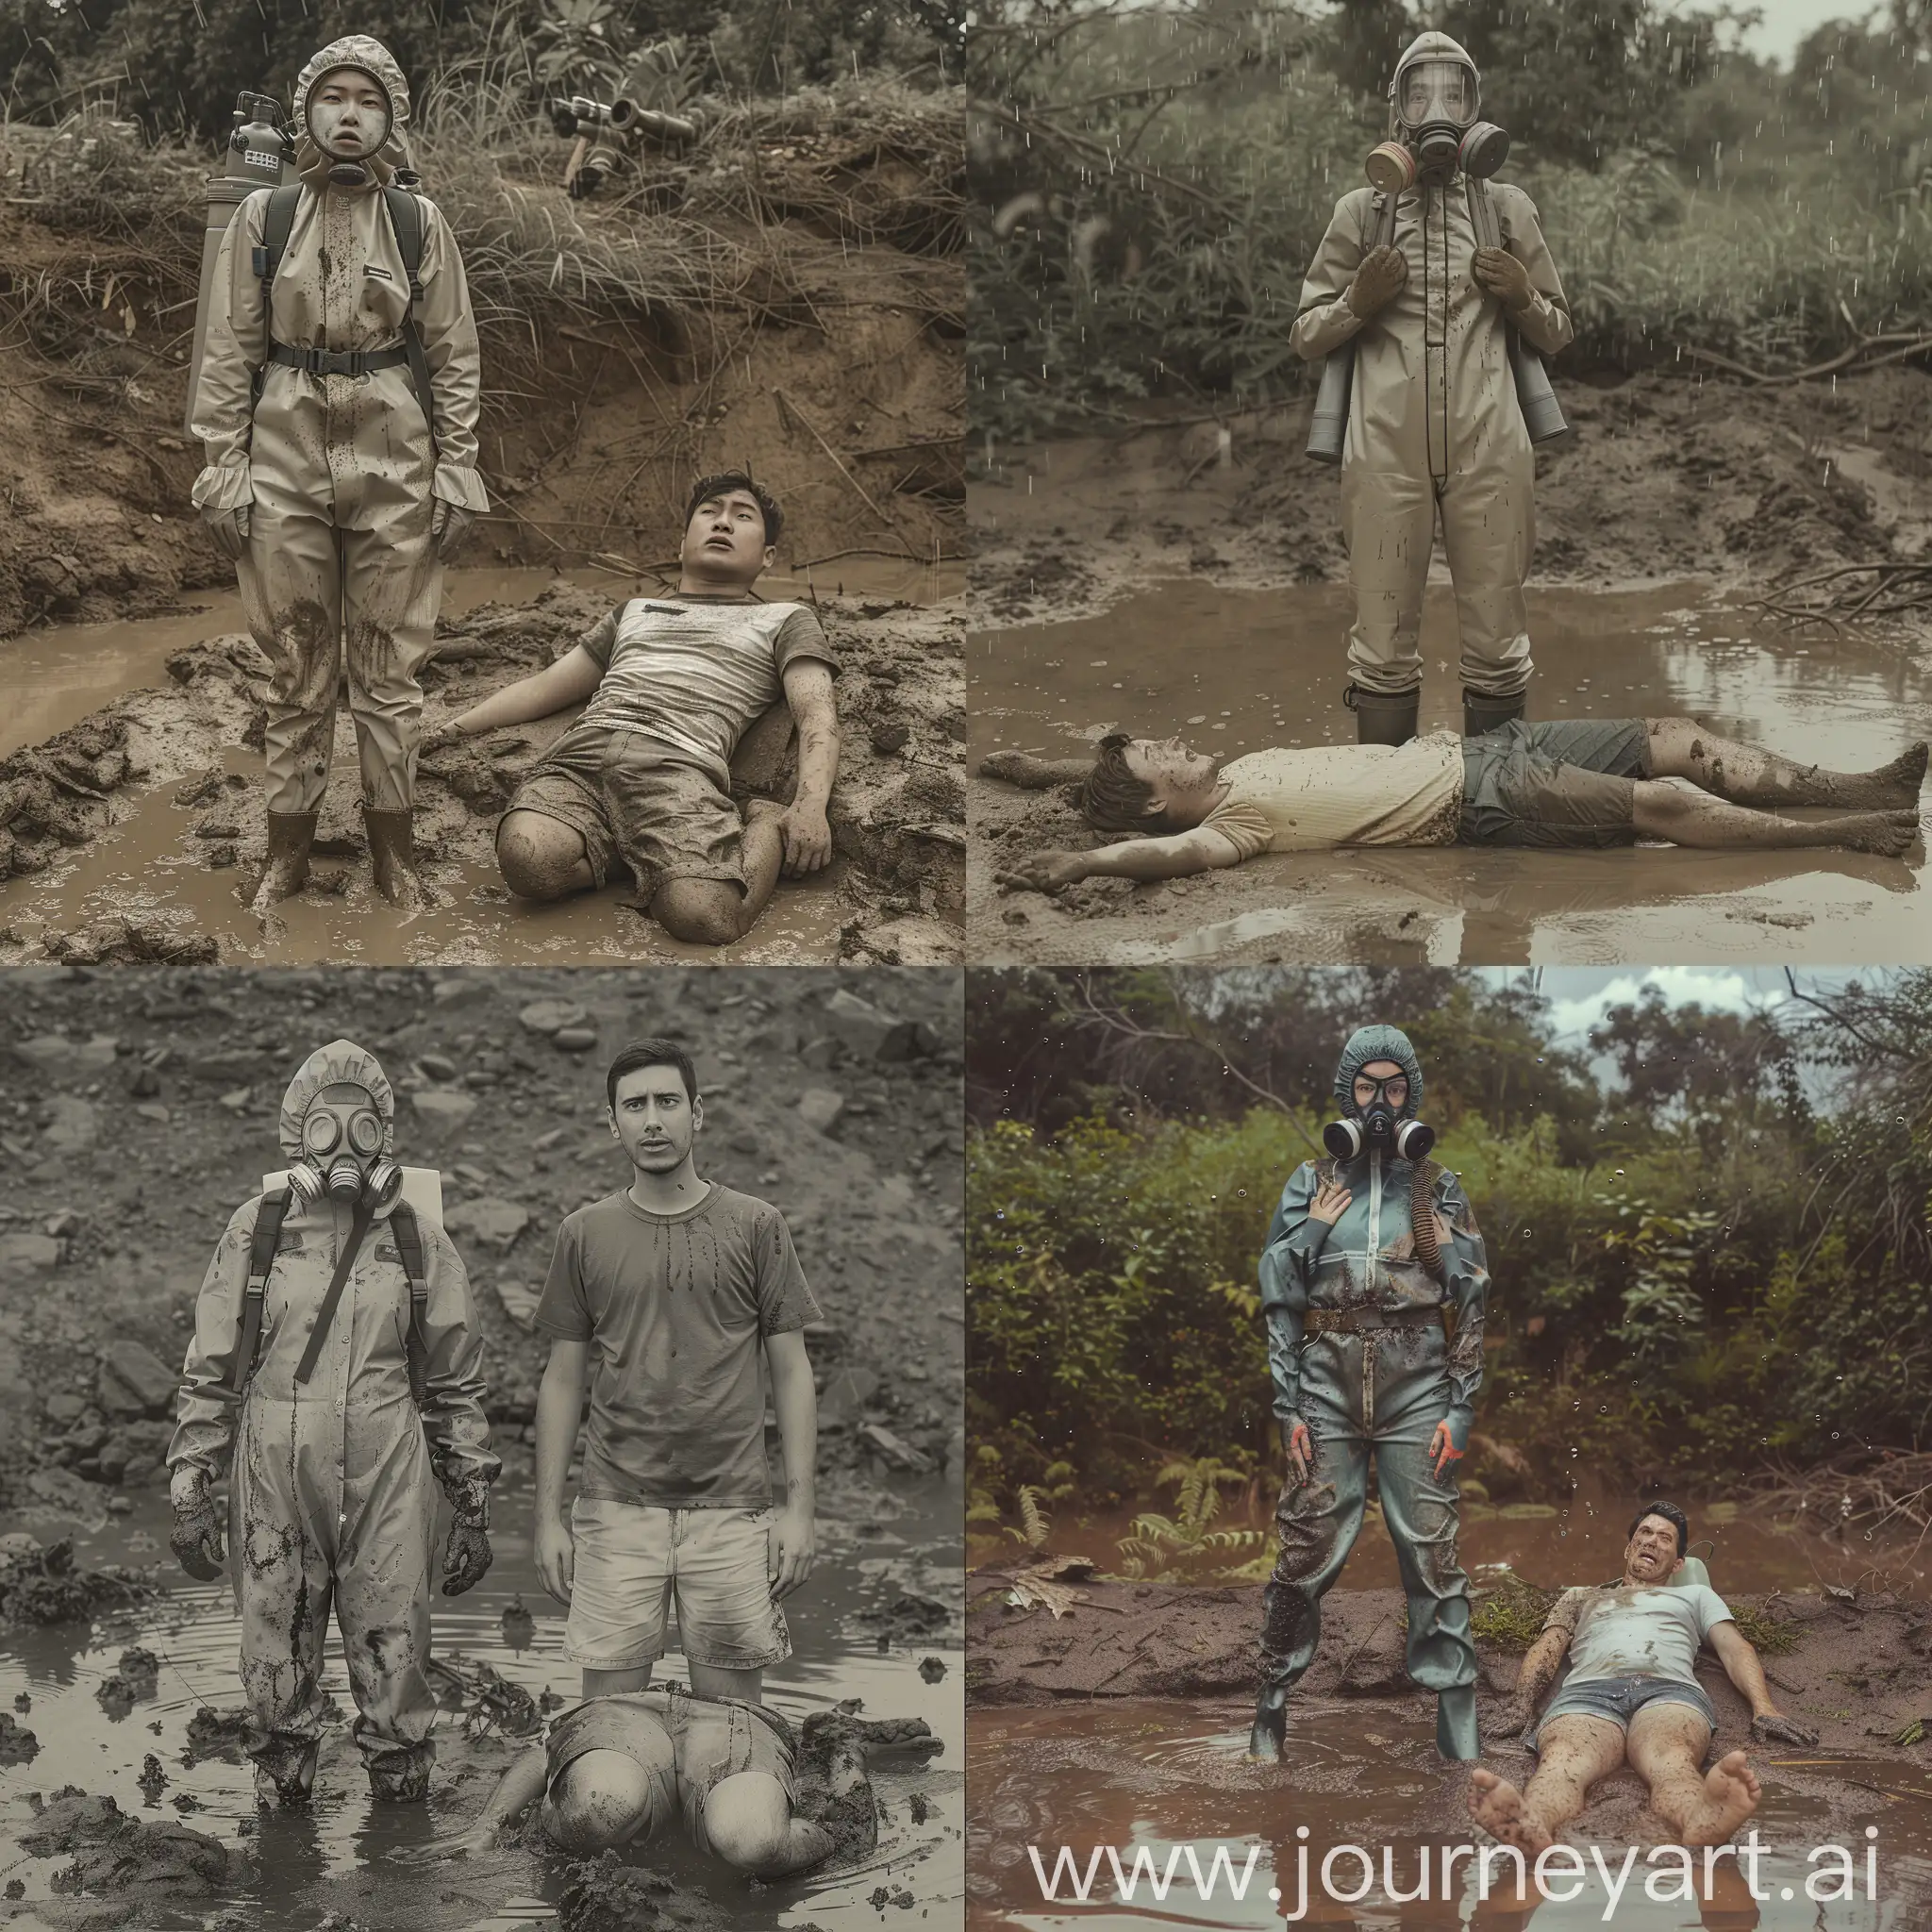 Confidence-in-Adversity-Woman-in-Hazmat-Suit-with-Man-in-Mud-on-Rainy-Day